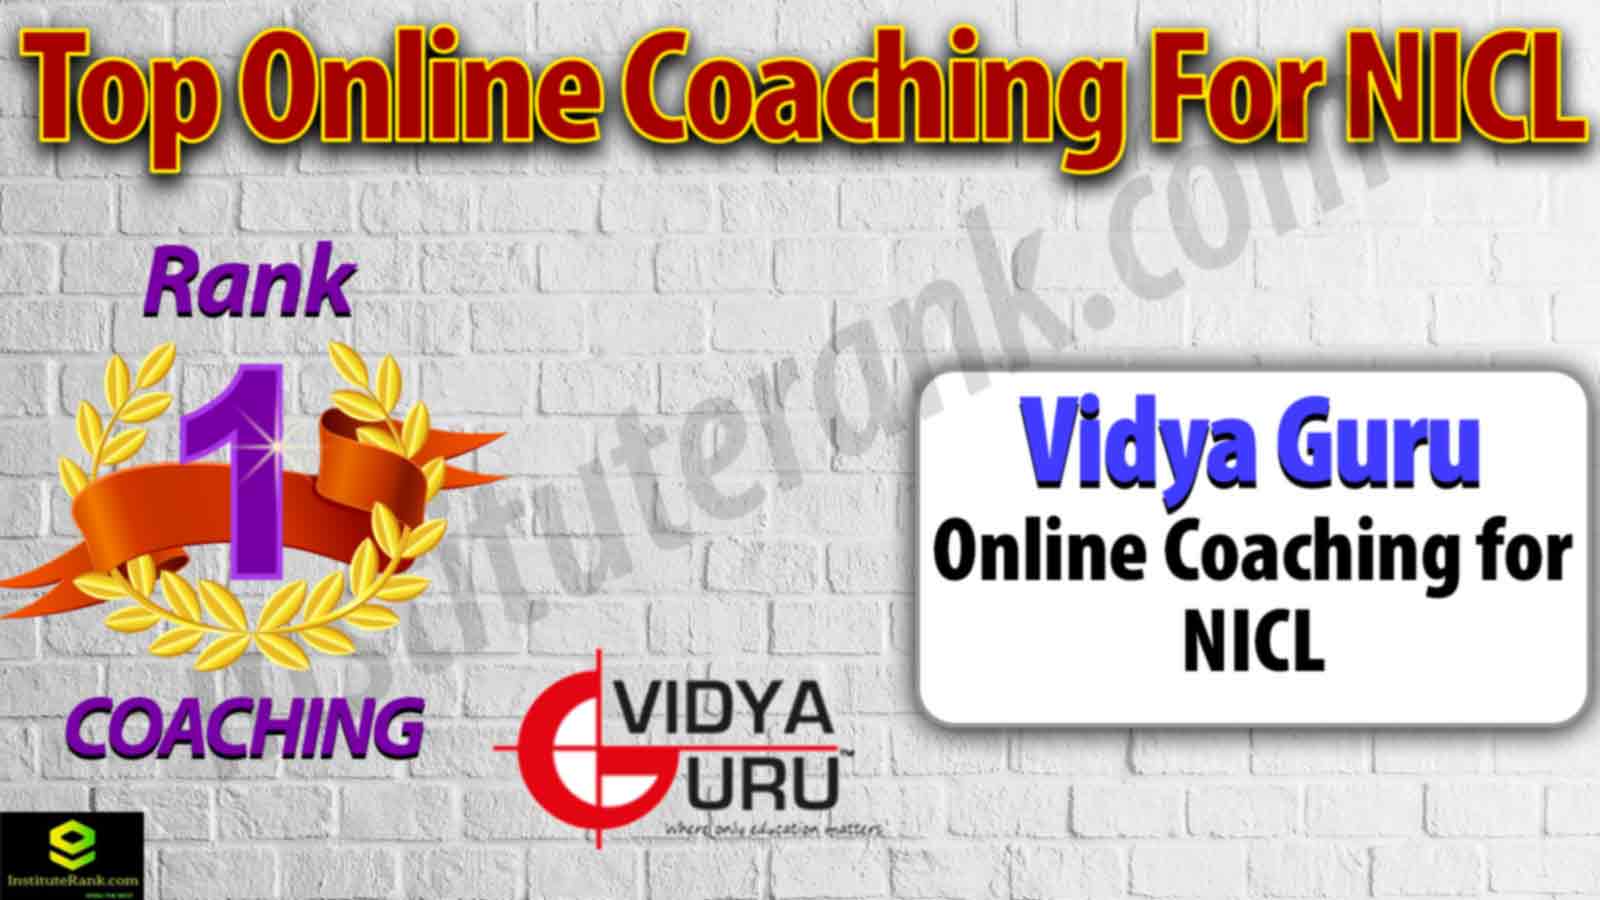 Top Online Coaching for NICL Examination